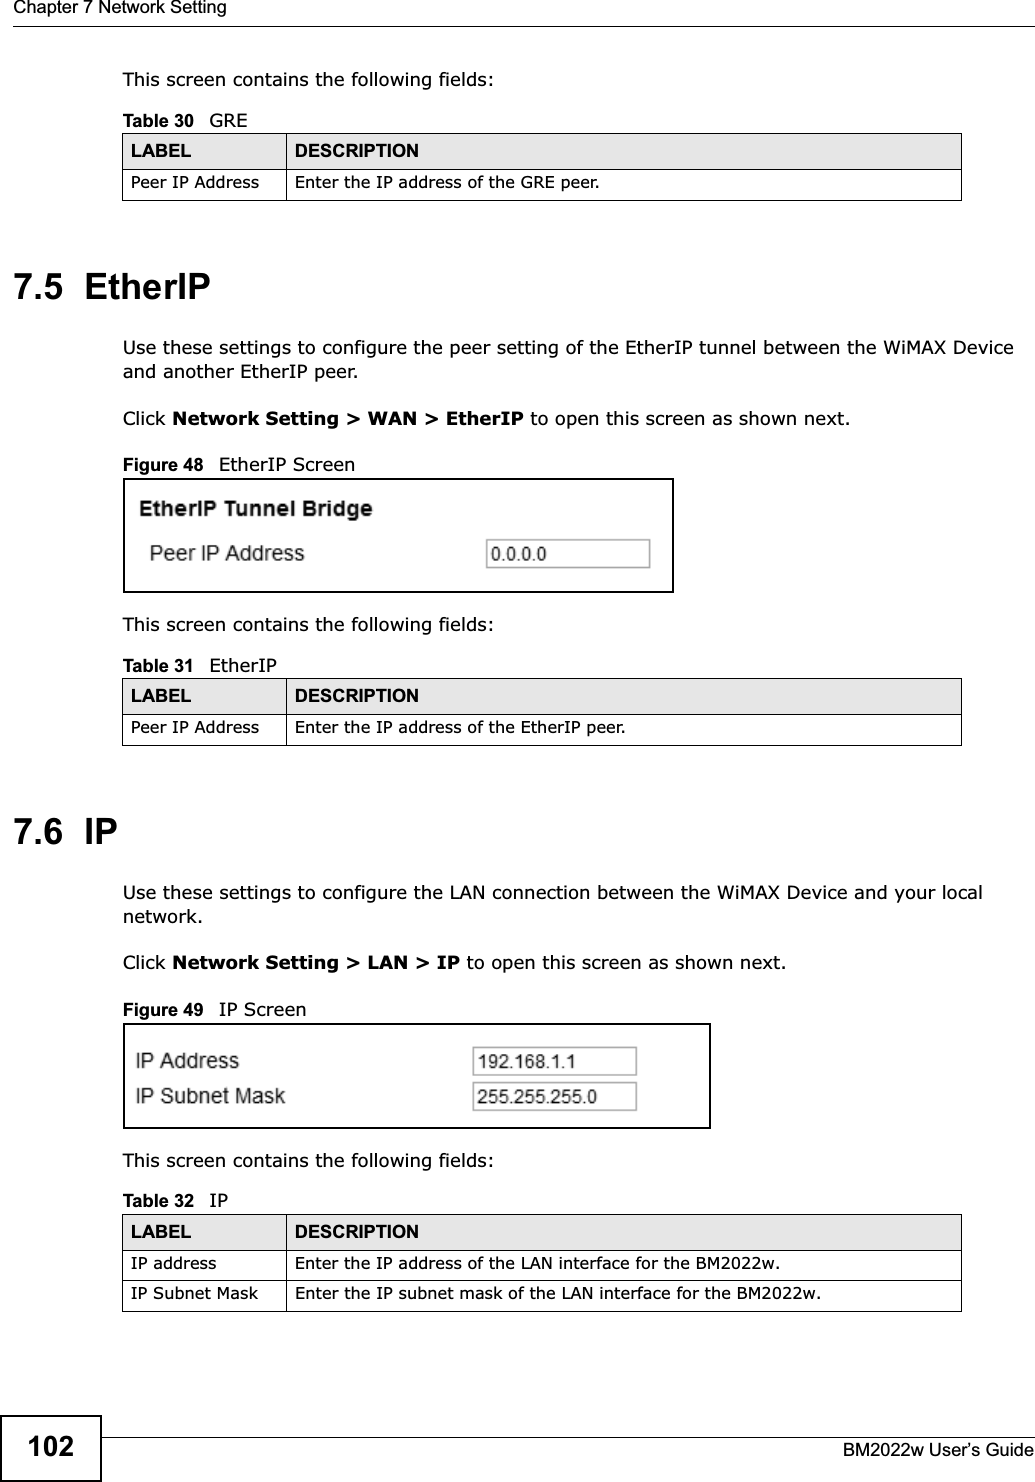 Chapter 7 Network SettingBM2022w User’s Guide102This screen contains the following fields:7.5  EtherIPUse these settings to configure the peer setting of the EtherIP tunnel between the WiMAX Device and another EtherIP peer.Click Network Setting &gt; WAN &gt; EtherIP to open this screen as shown next.Figure 48   EtherIP ScreenThis screen contains the following fields:7.6  IPUse these settings to configure the LAN connection between the WiMAX Device and your local network.Click Network Setting &gt; LAN &gt; IP to open this screen as shown next.Figure 49   IP ScreenThis screen contains the following fields:Table 30   GRELABEL DESCRIPTIONPeer IP Address Enter the IP address of the GRE peer.Table 31   EtherIPLABEL DESCRIPTIONPeer IP Address Enter the IP address of the EtherIP peer.Table 32   IPLABEL DESCRIPTIONIP address Enter the IP address of the LAN interface for the BM2022w.IP Subnet Mask Enter the IP subnet mask of the LAN interface for the BM2022w.